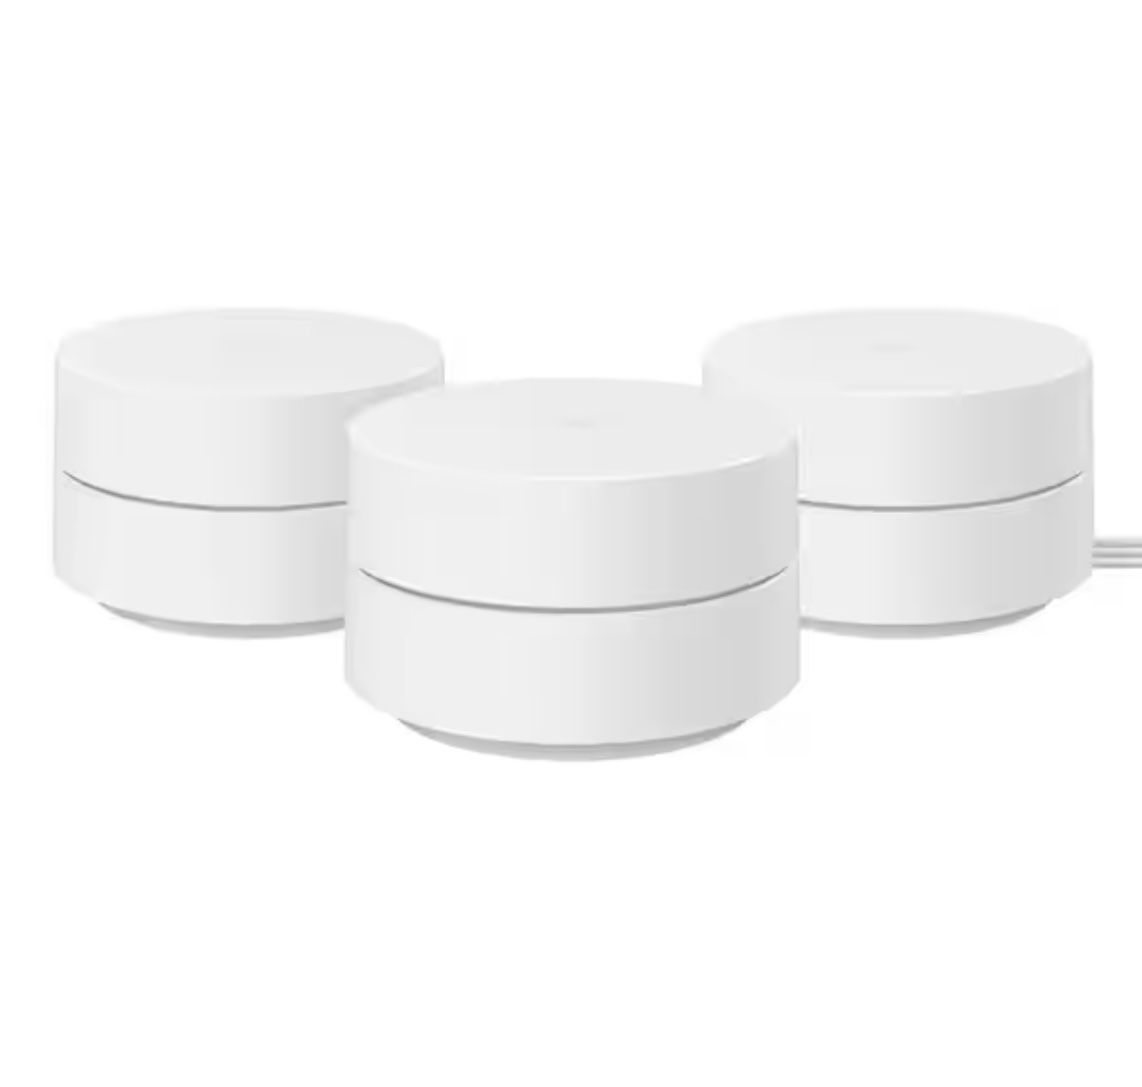 Google WiFi - Mesh Router AC1200 - Powered Adapter - White - (3-Pack)